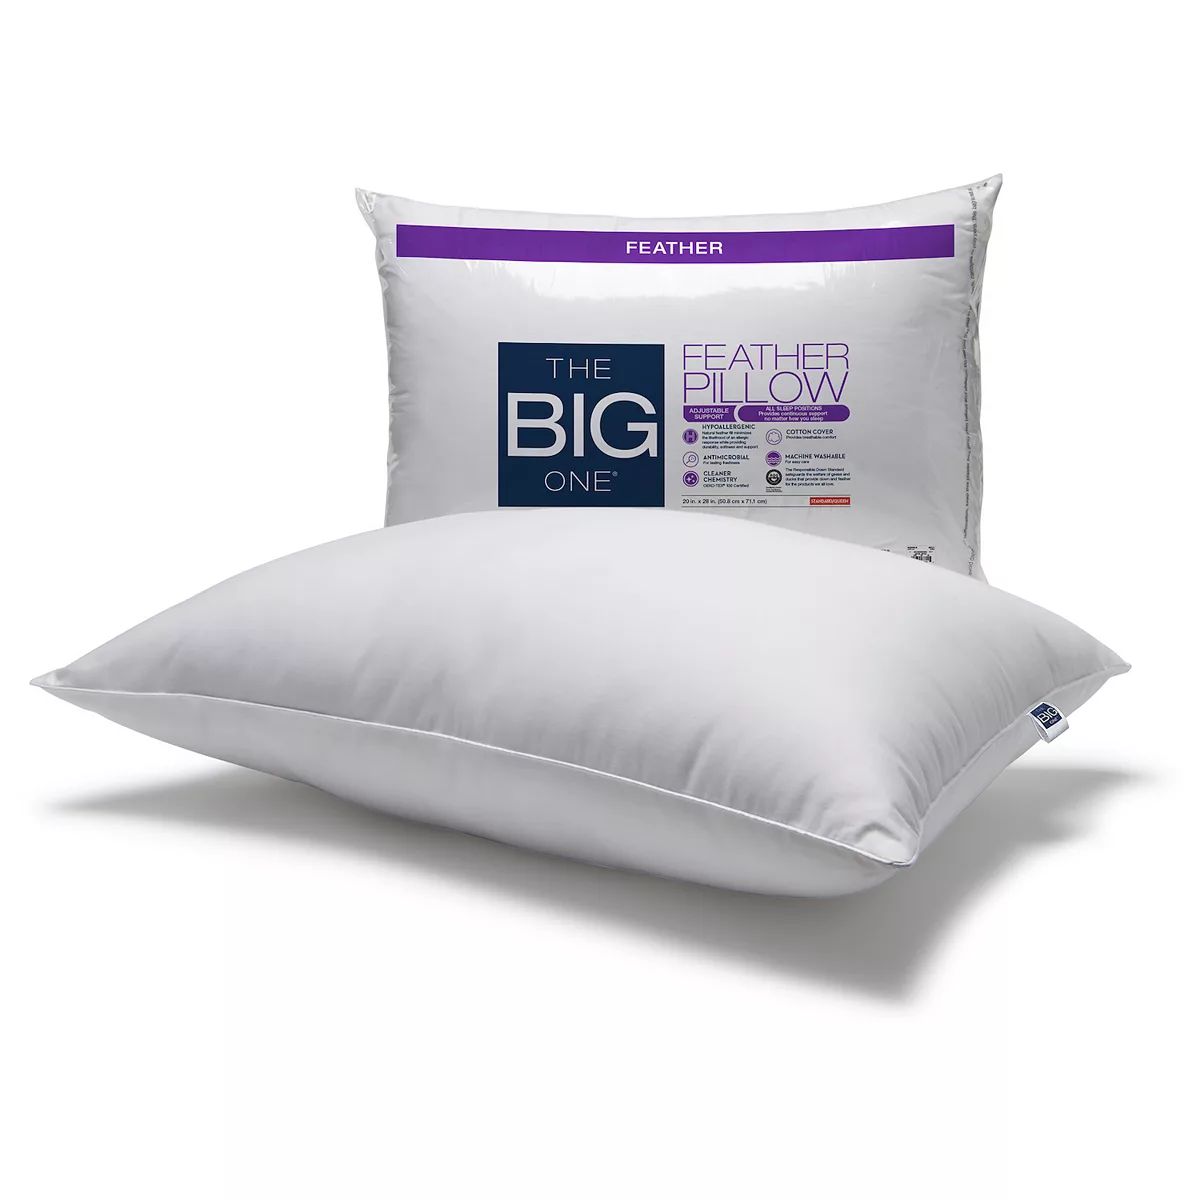 The Big One® Feather Pillow | Kohl's